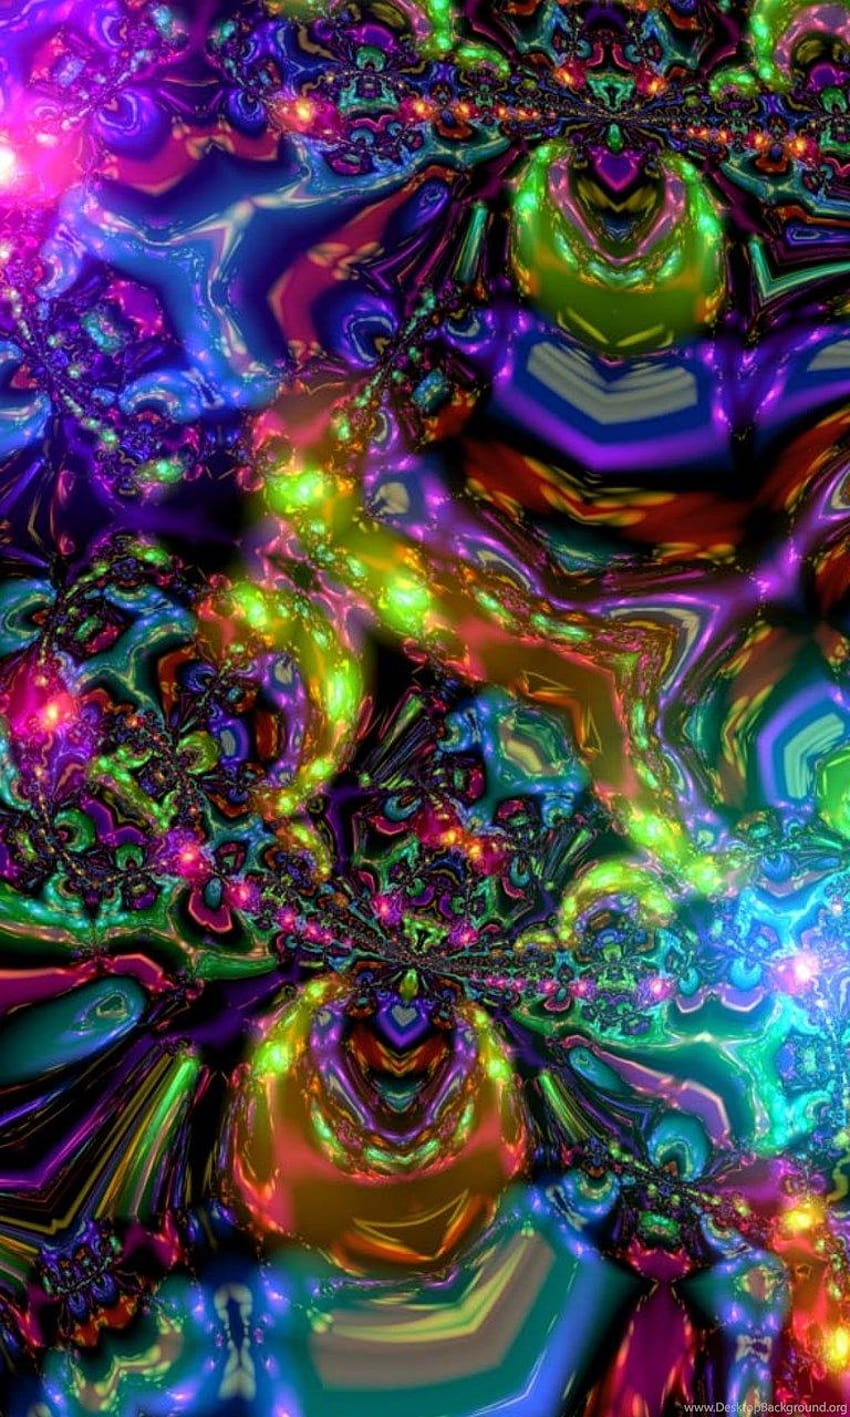 300+] Psychedelic Wallpapers | Wallpapers.com